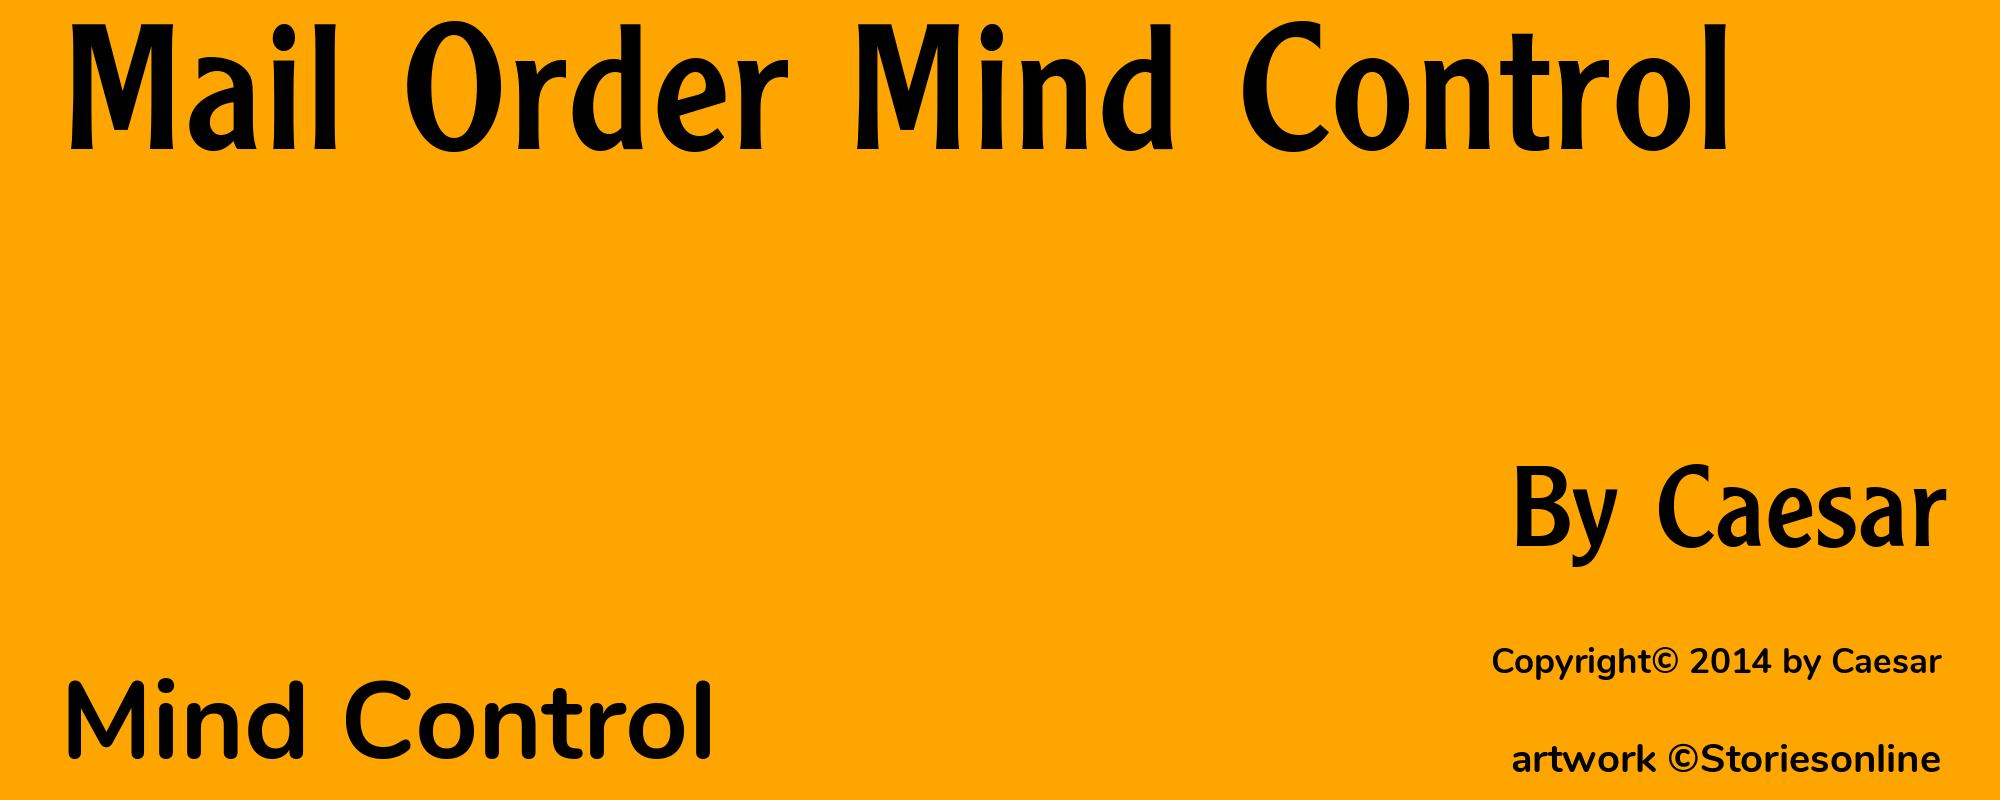 Mail Order Mind Control - Cover